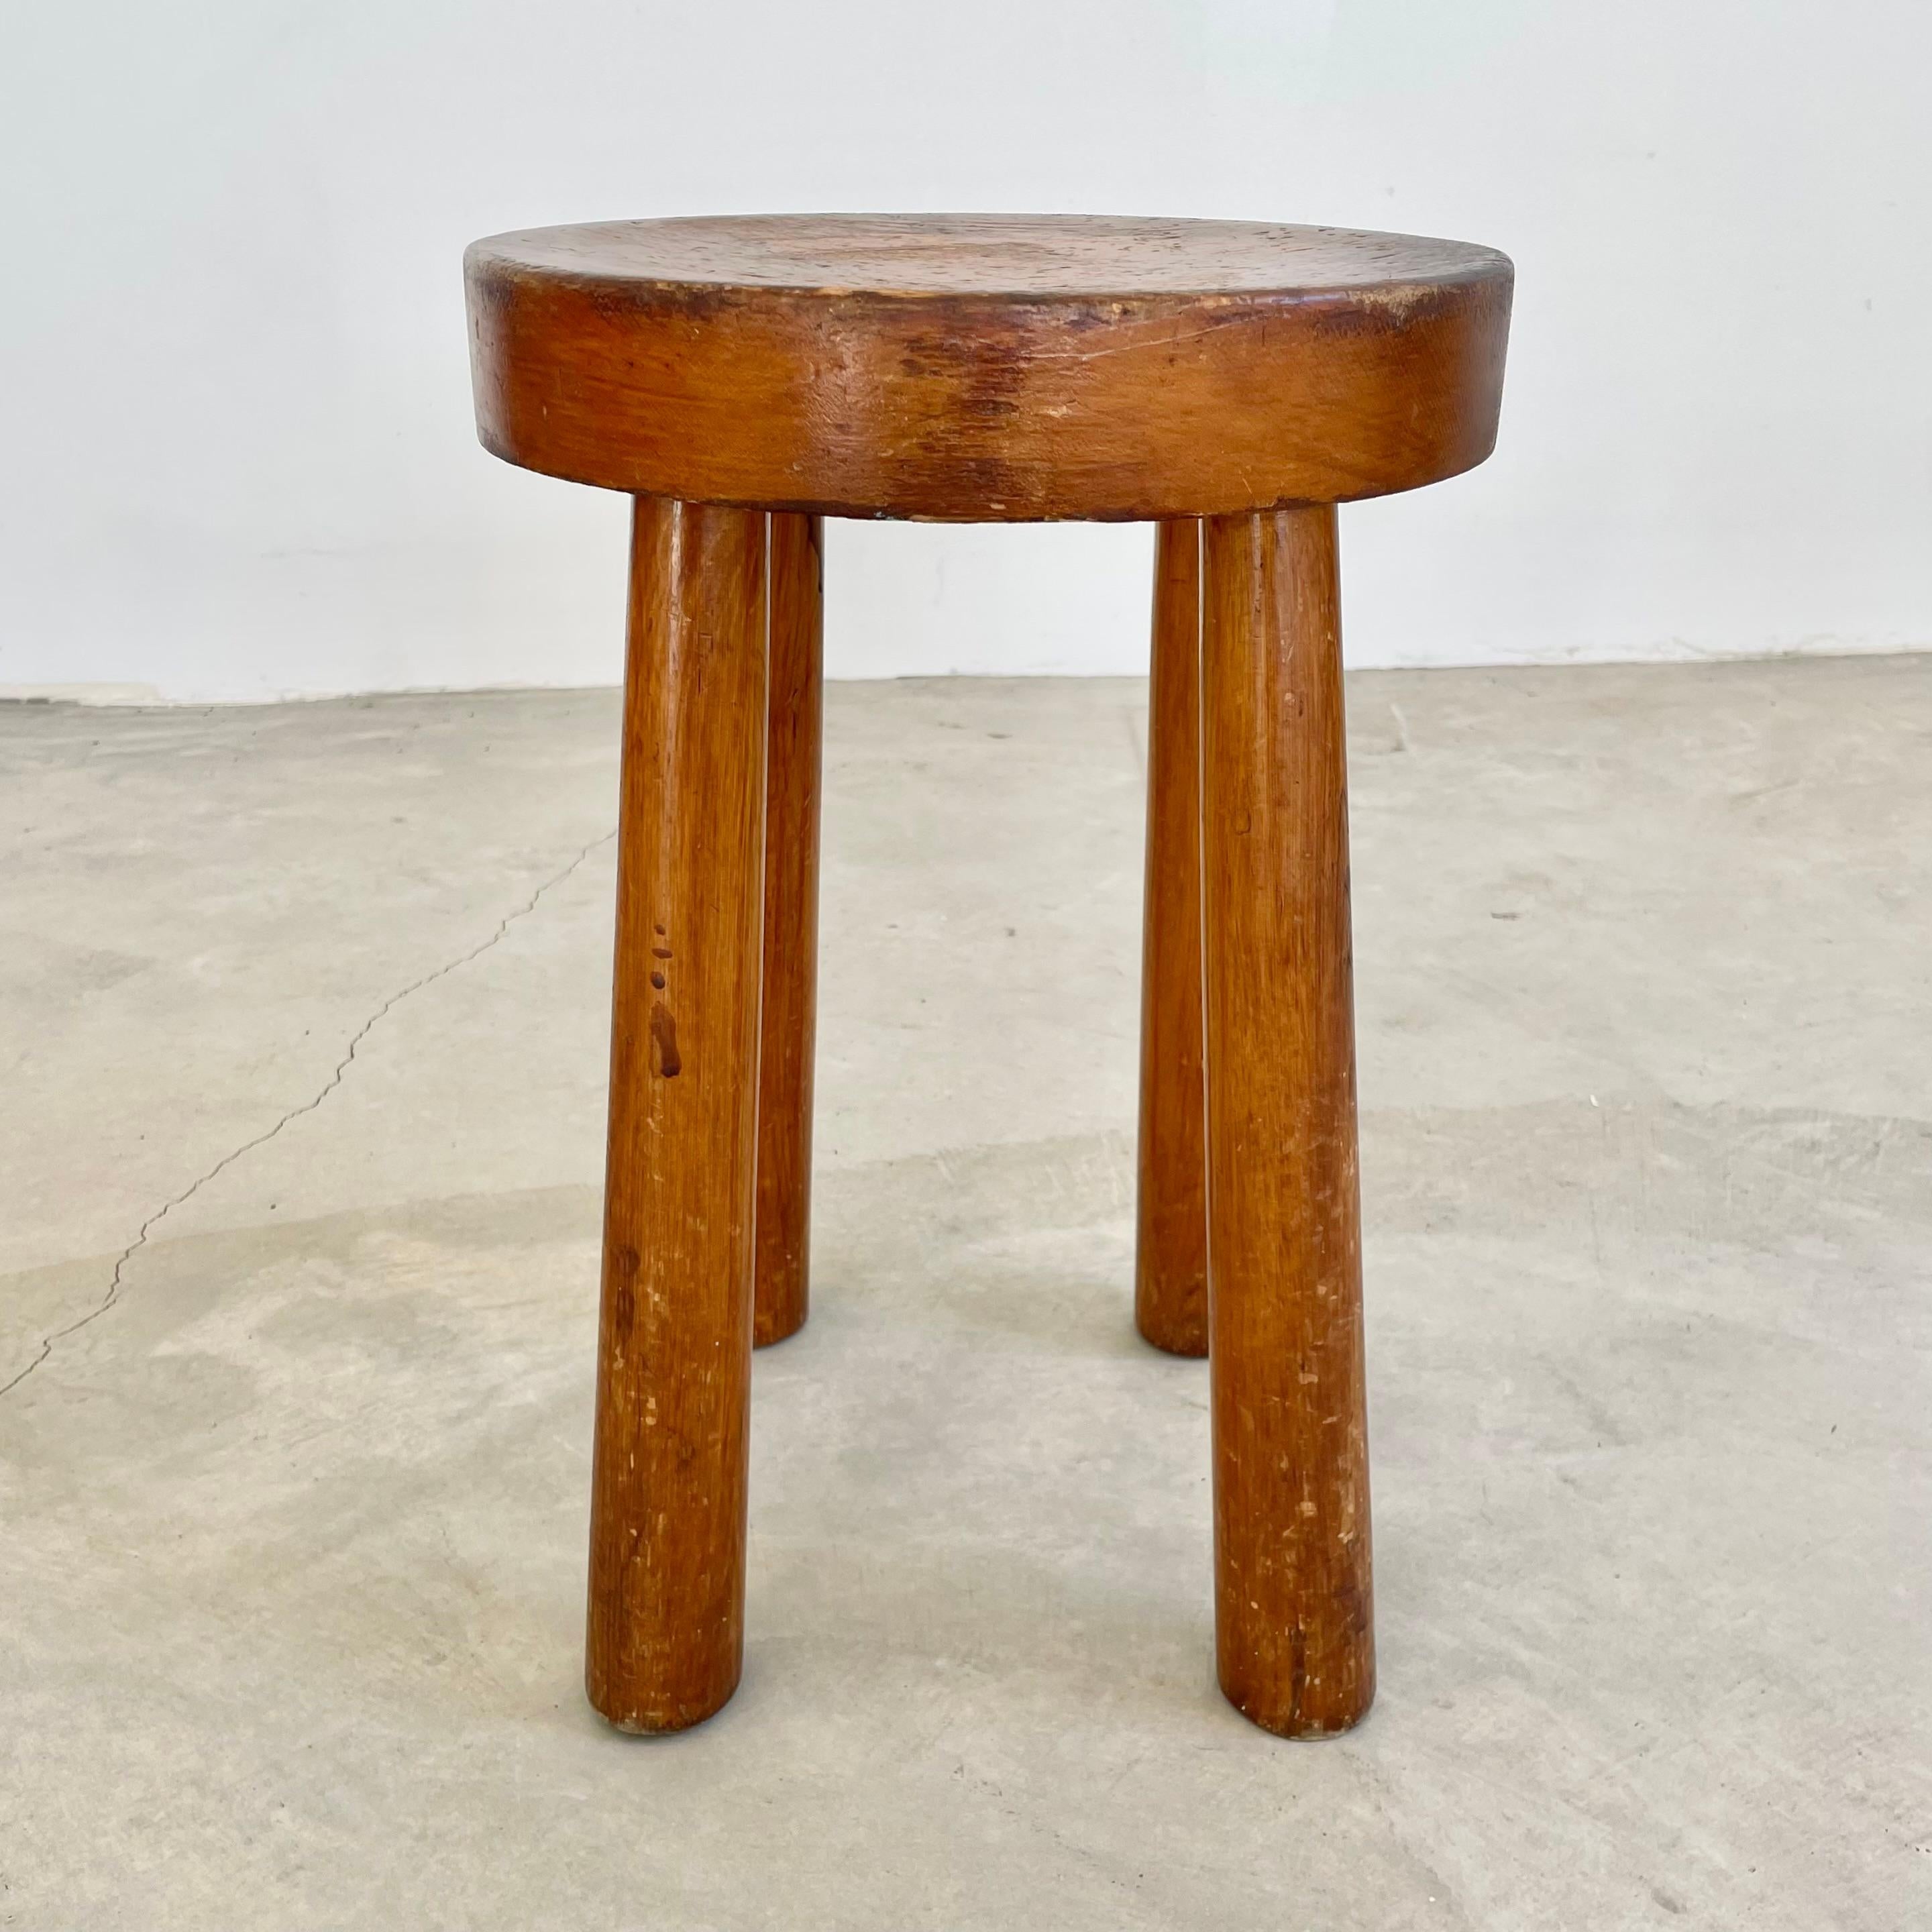 Beautiful Perriand style, 4 legged stool made in France, circa 1960s. Substantial and chunky round seat with four sturdy club legs that taper out at the bottom. Perfect patina and age have made this stool a perfect example of brutalist stools.